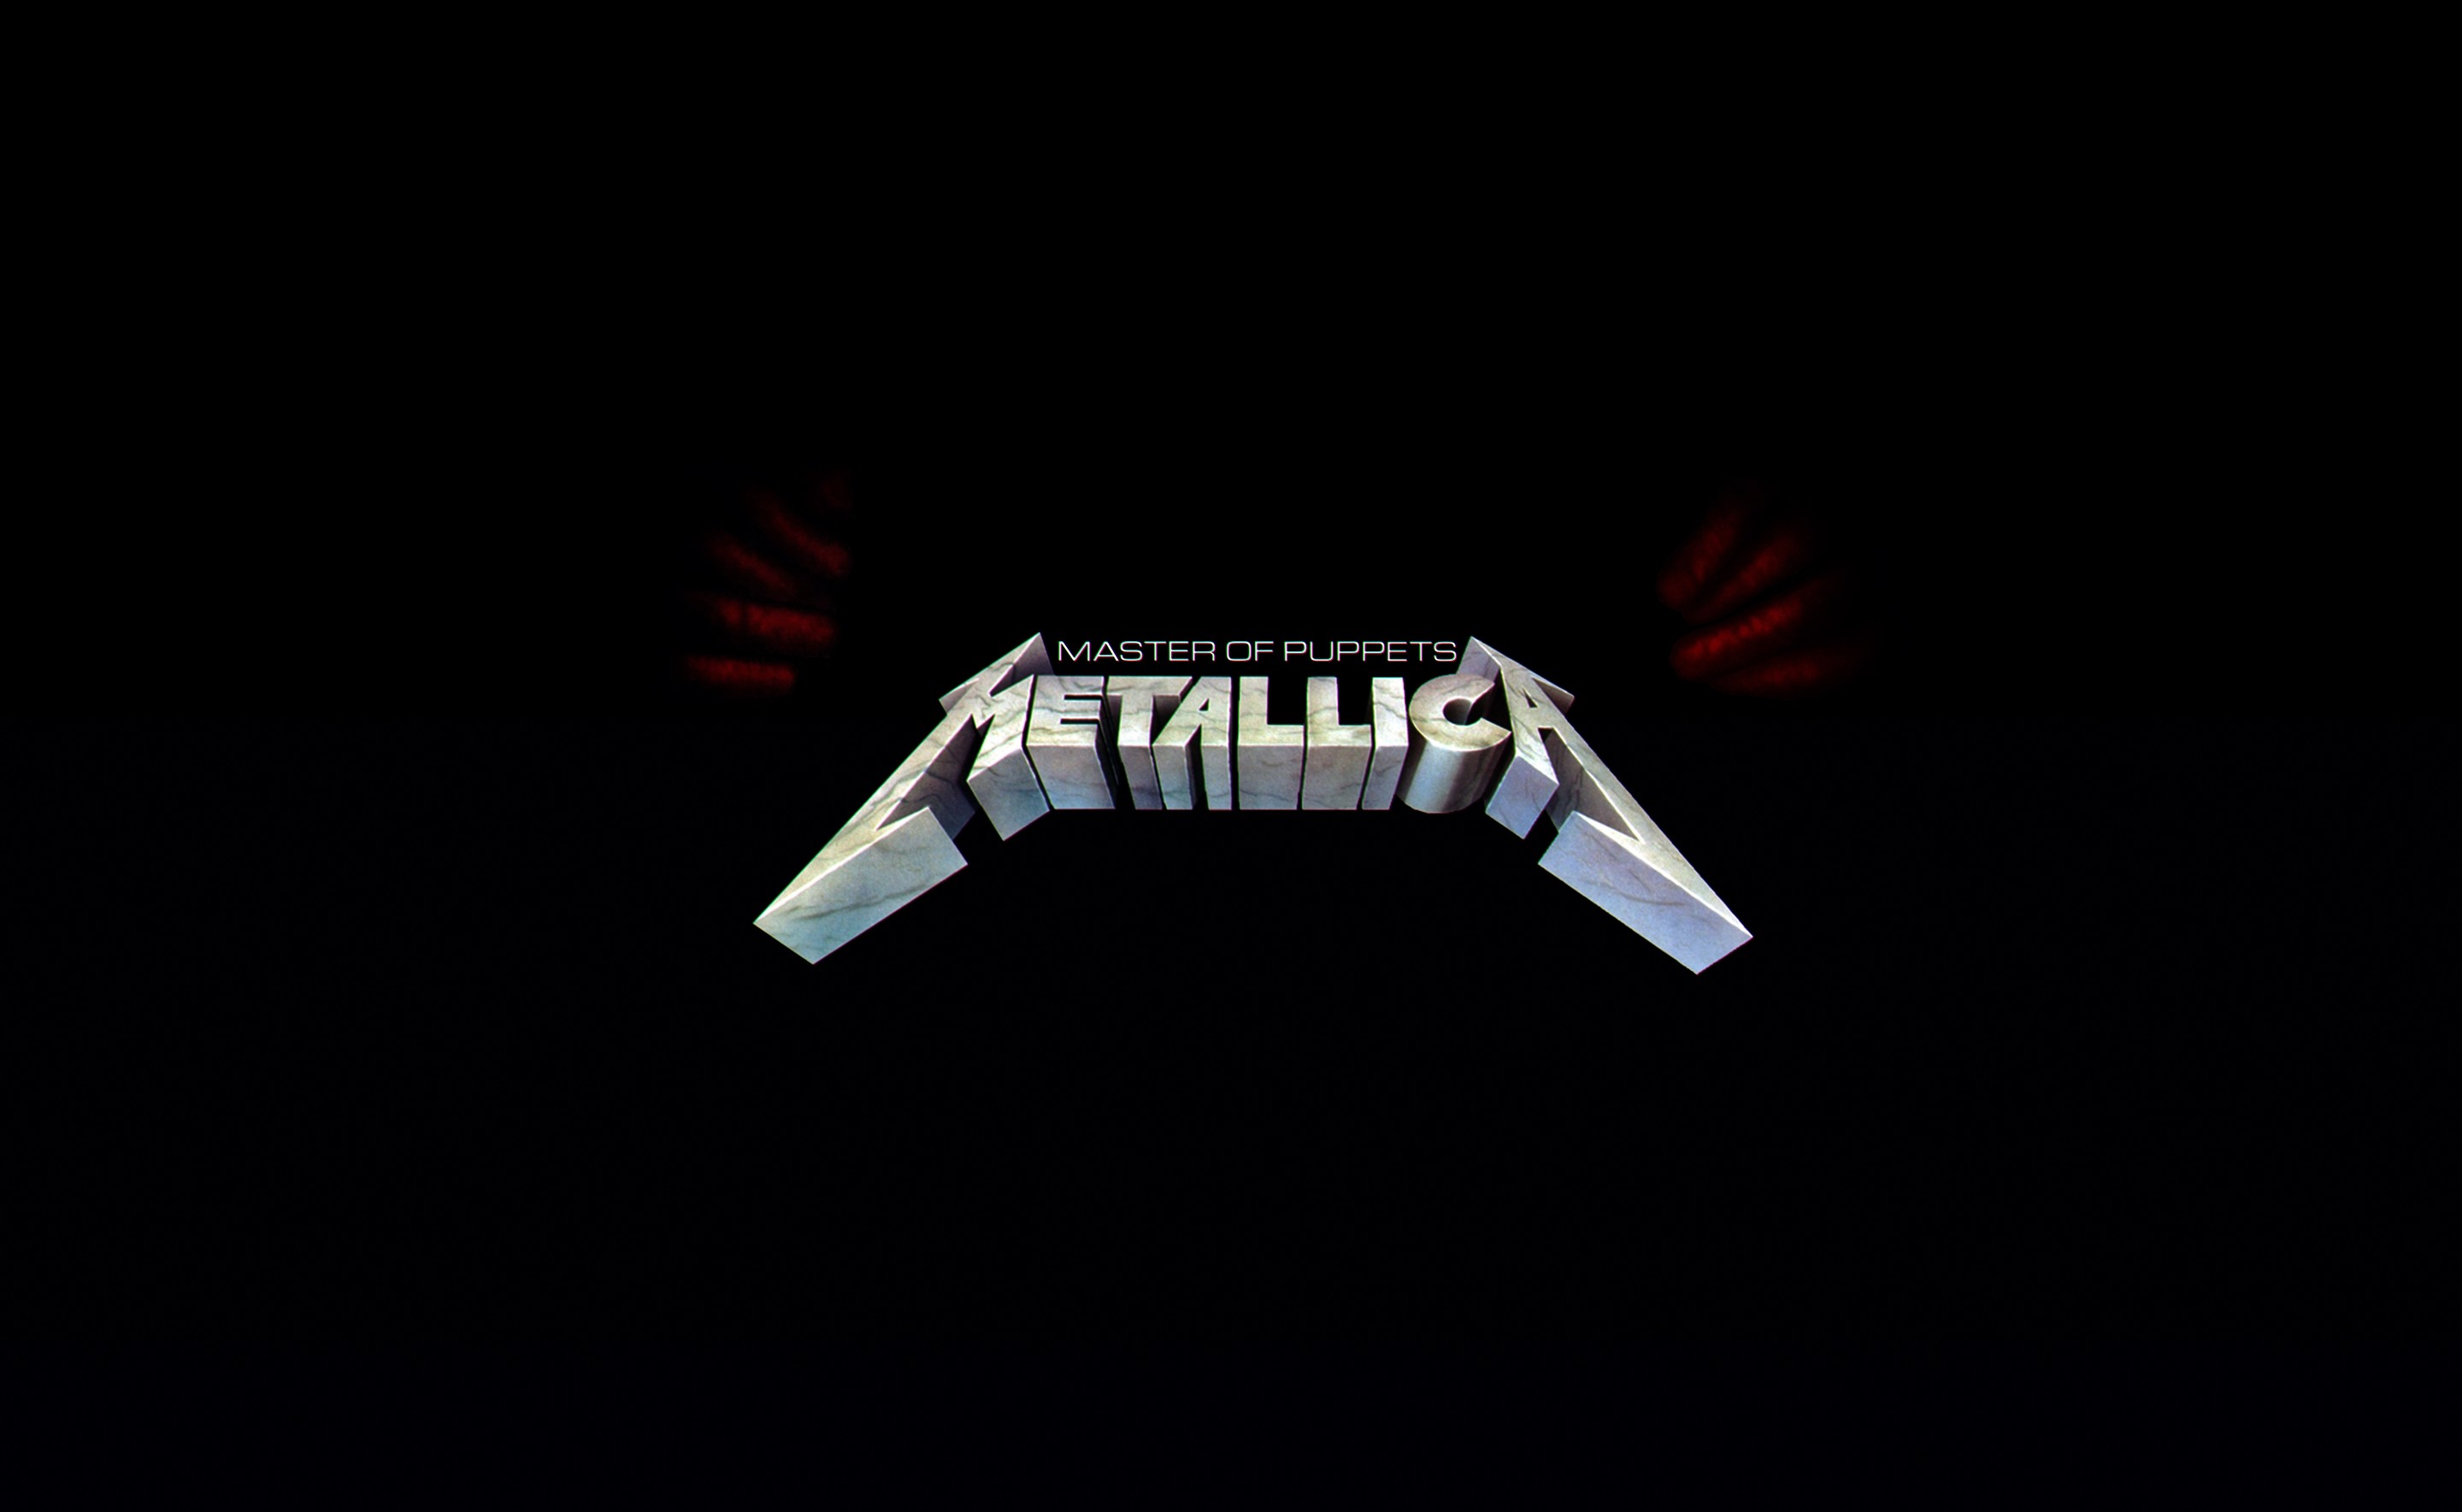 2880x1769 Some metallica albums wallpapers i made